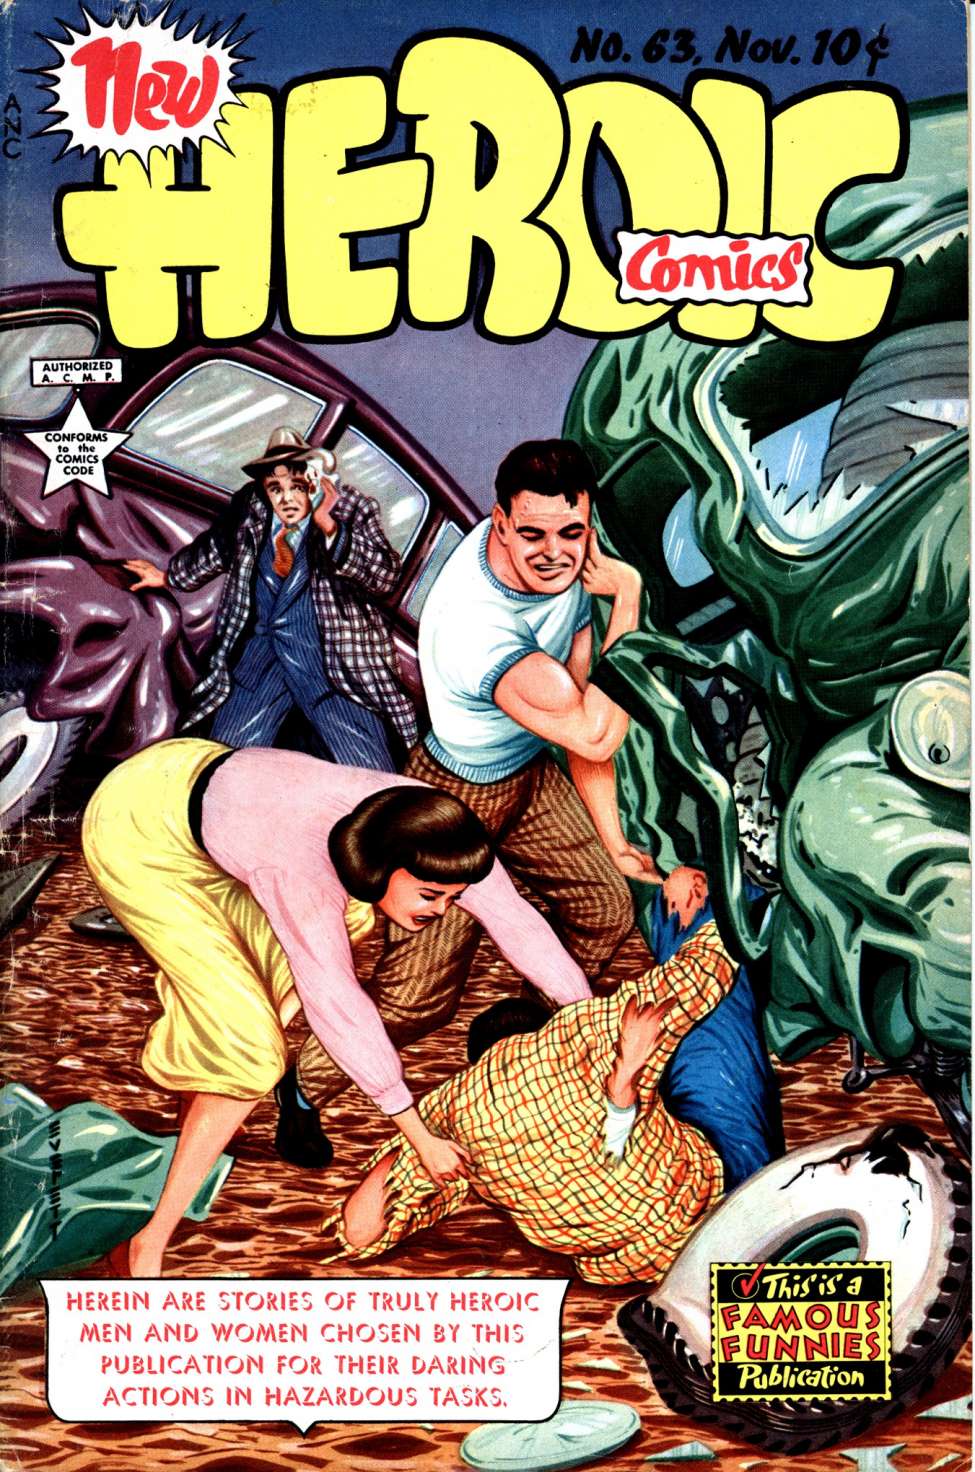 Book Cover For New Heroic Comics 63